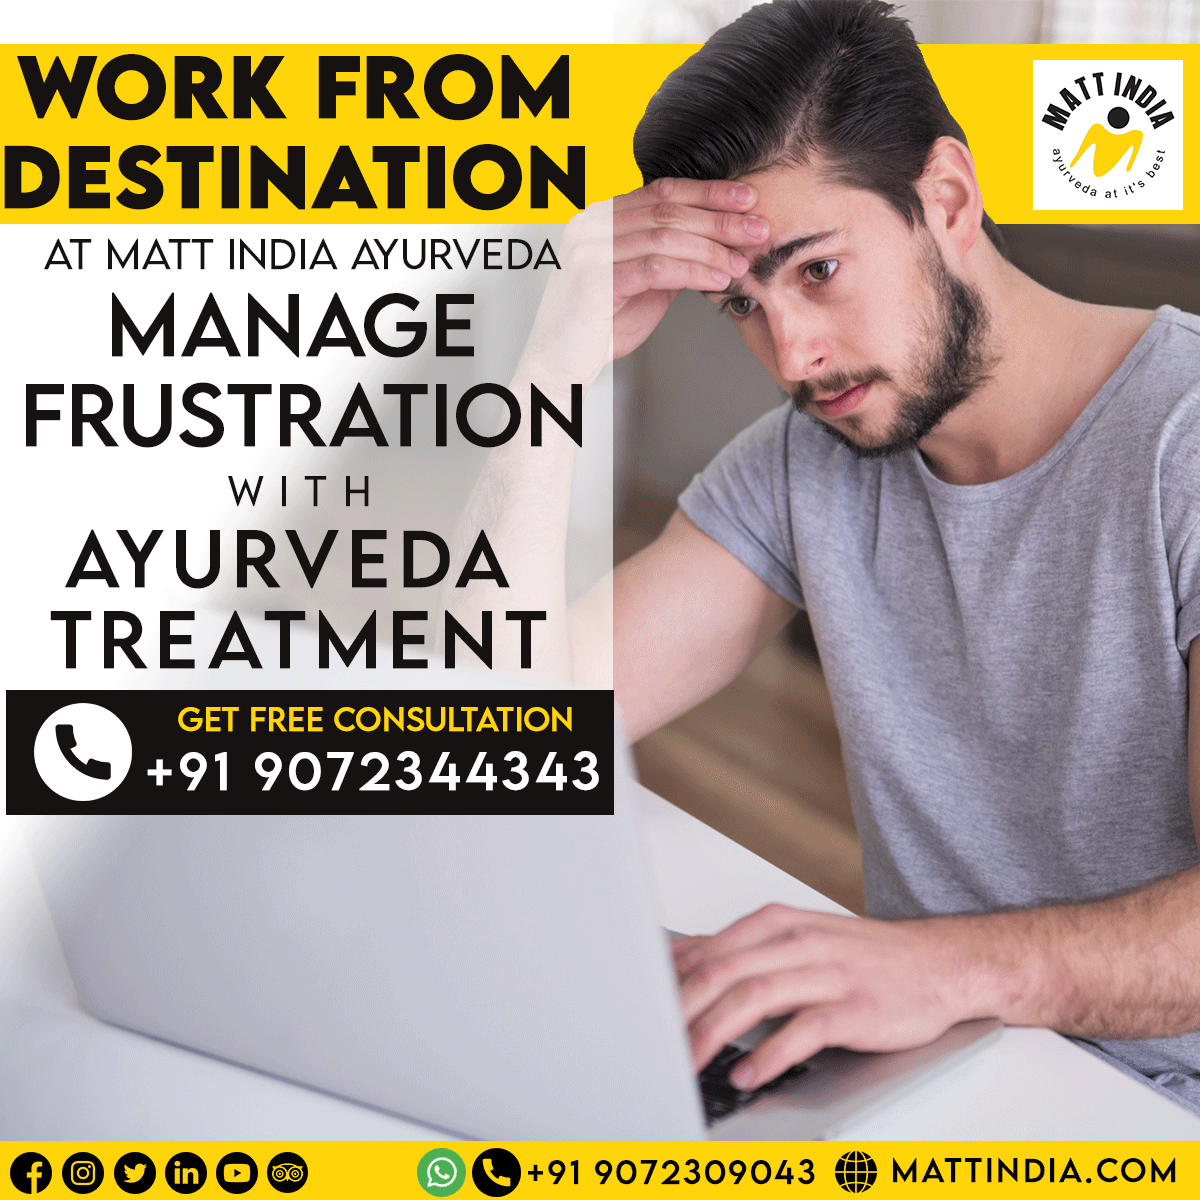 WORK FROM DESTINATION WITH AYURVEDA TREATMENT